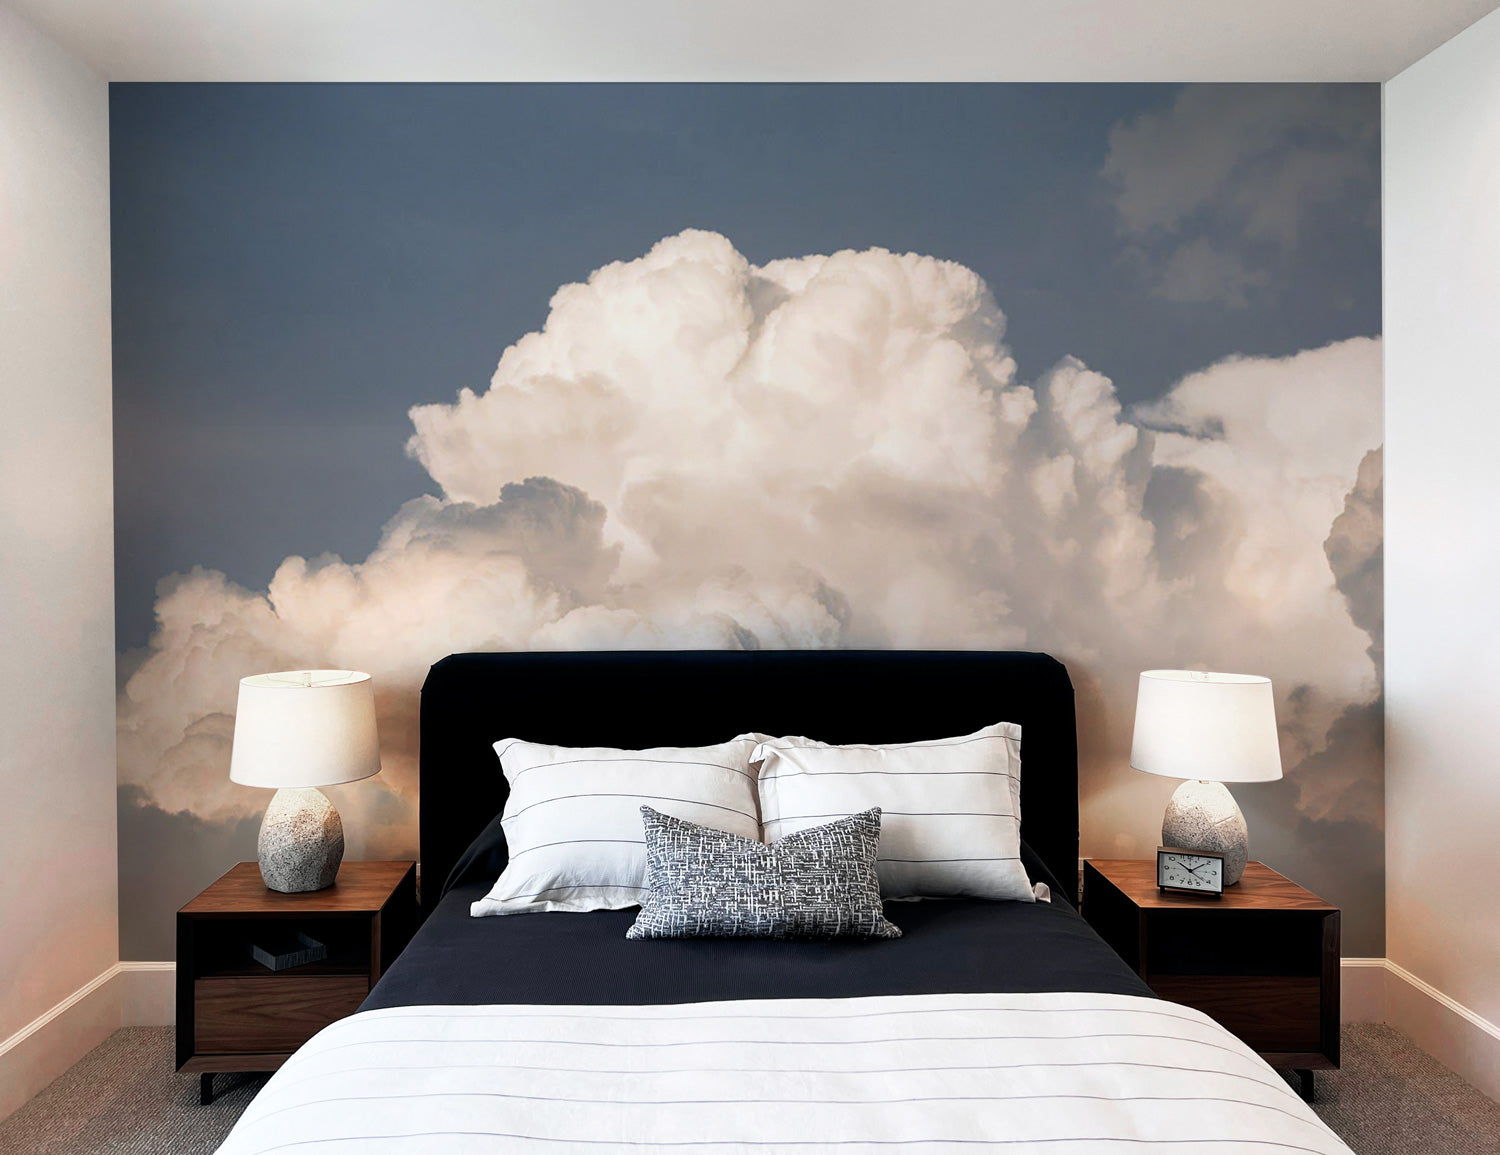 clouds behind the bed